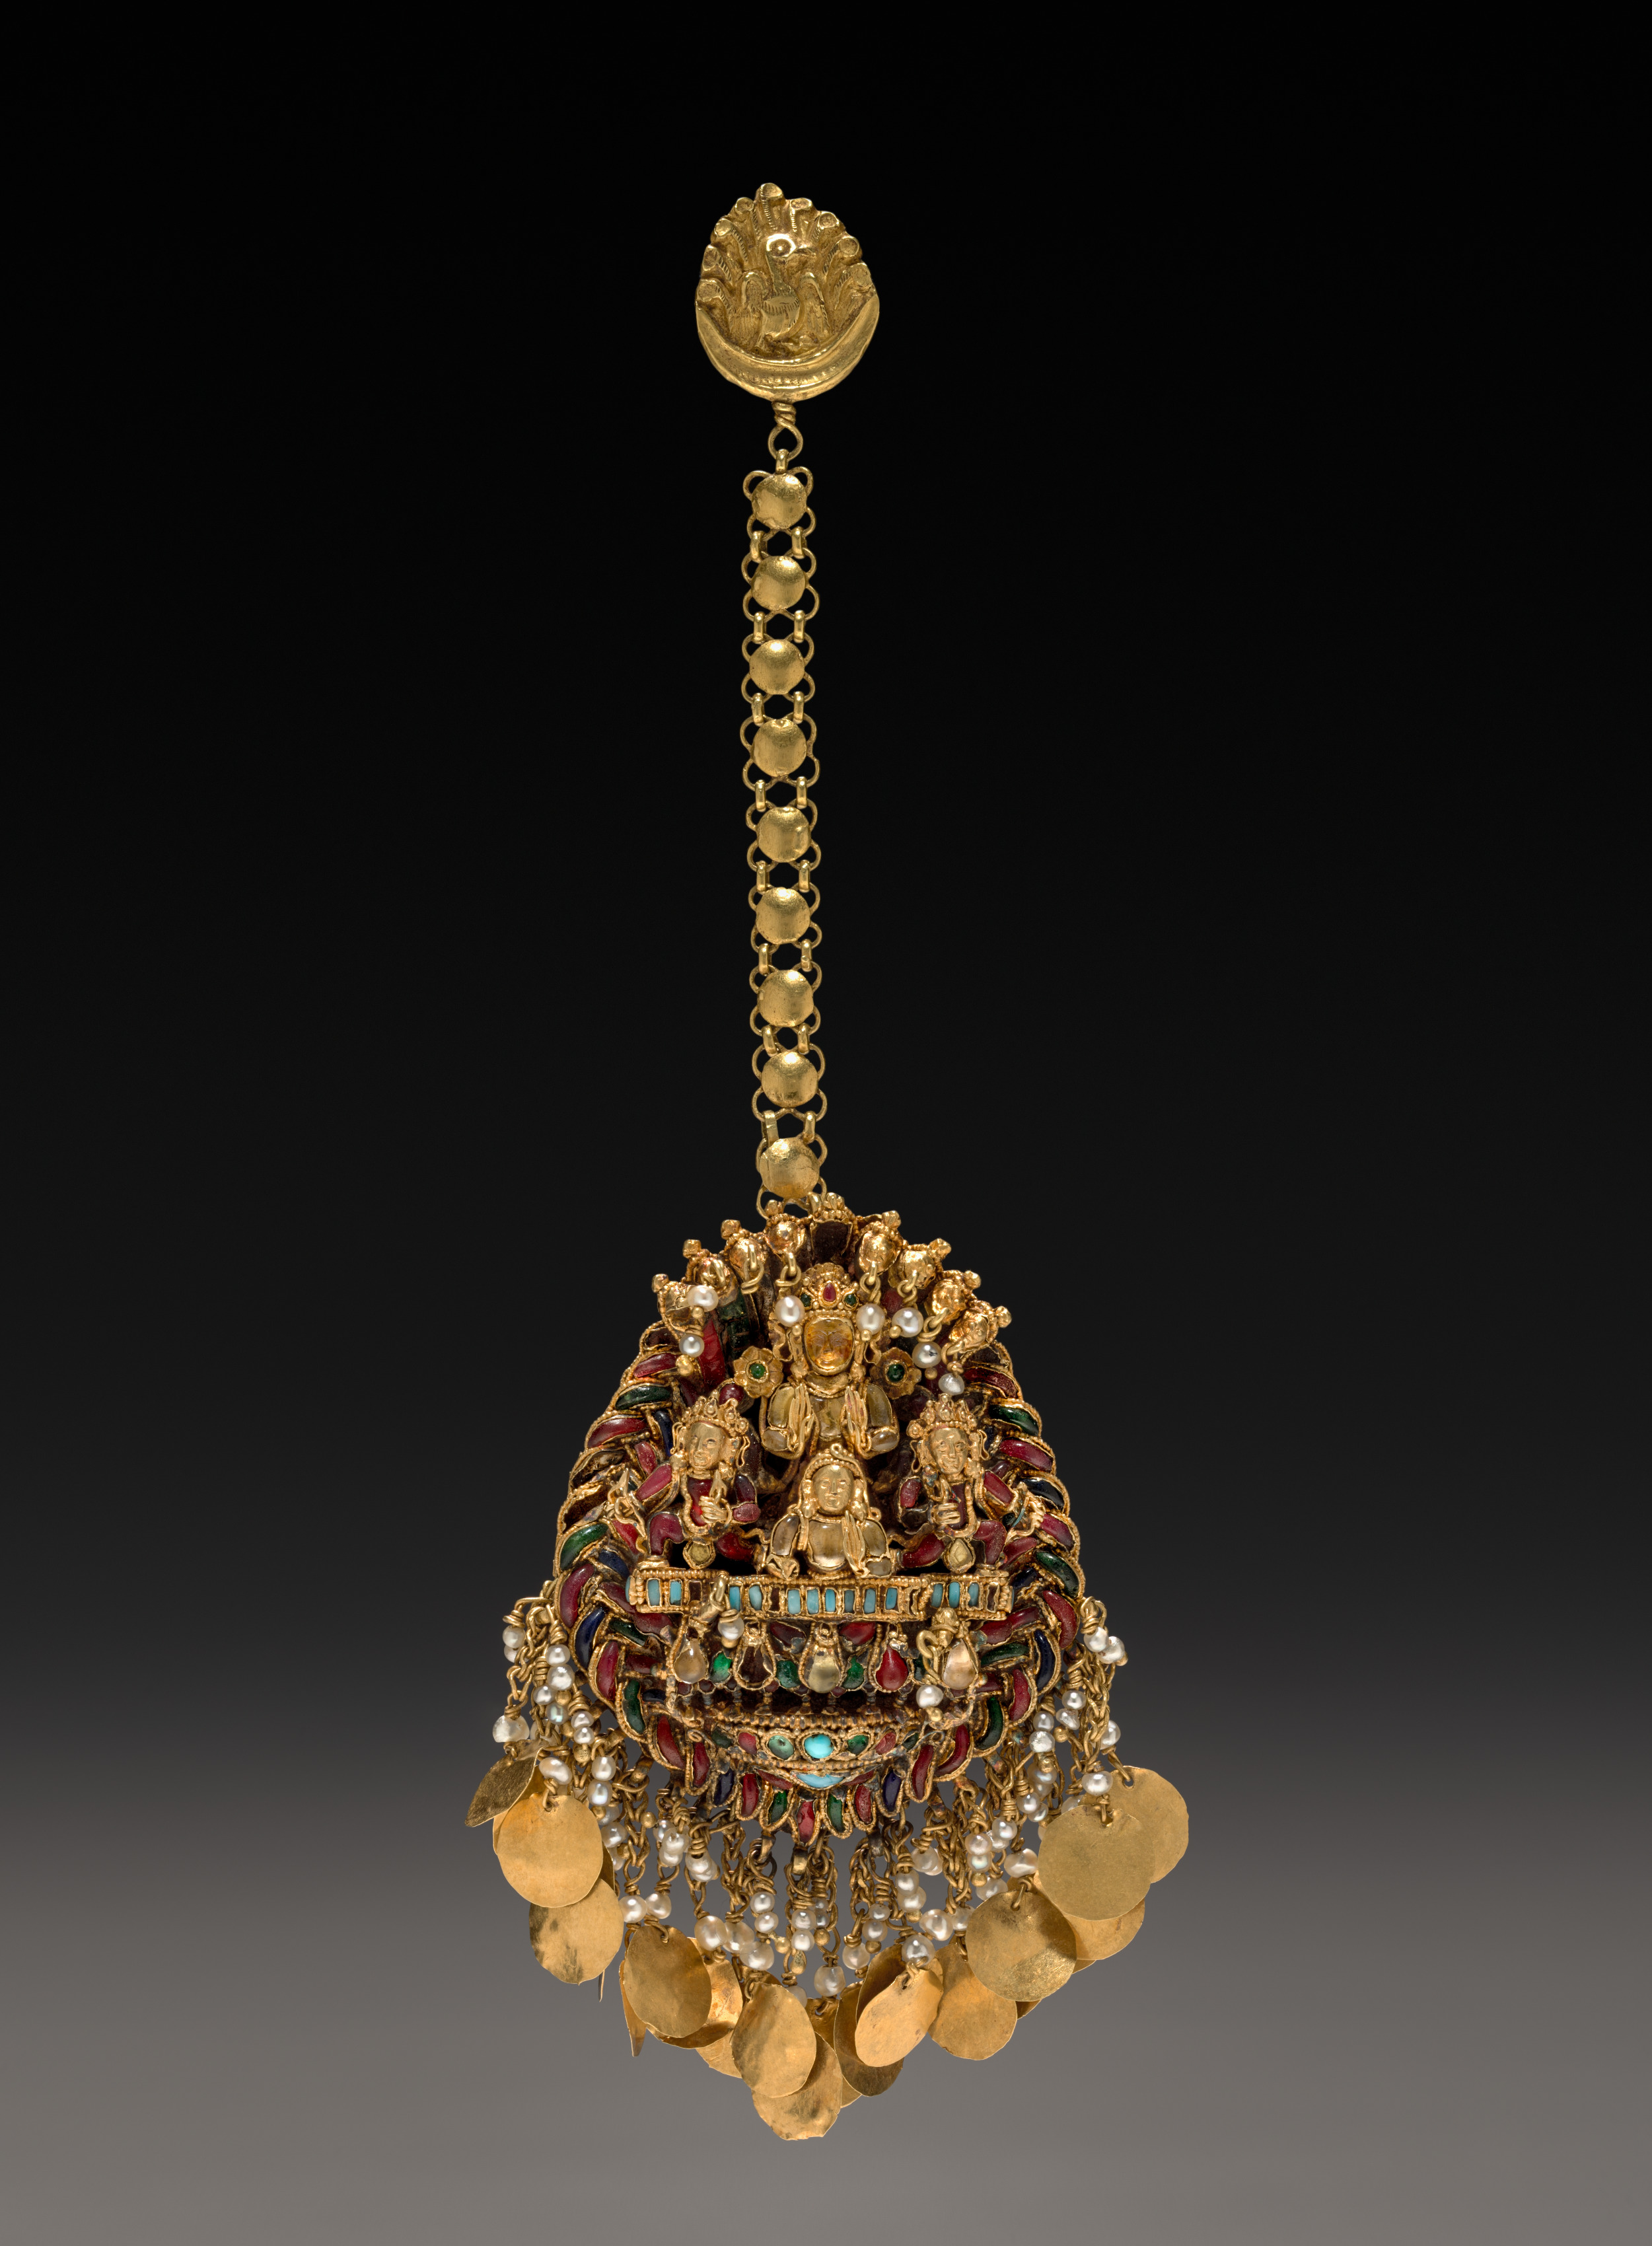 Forehead Pendant with Sun God Surya in a Chariot with Attendants